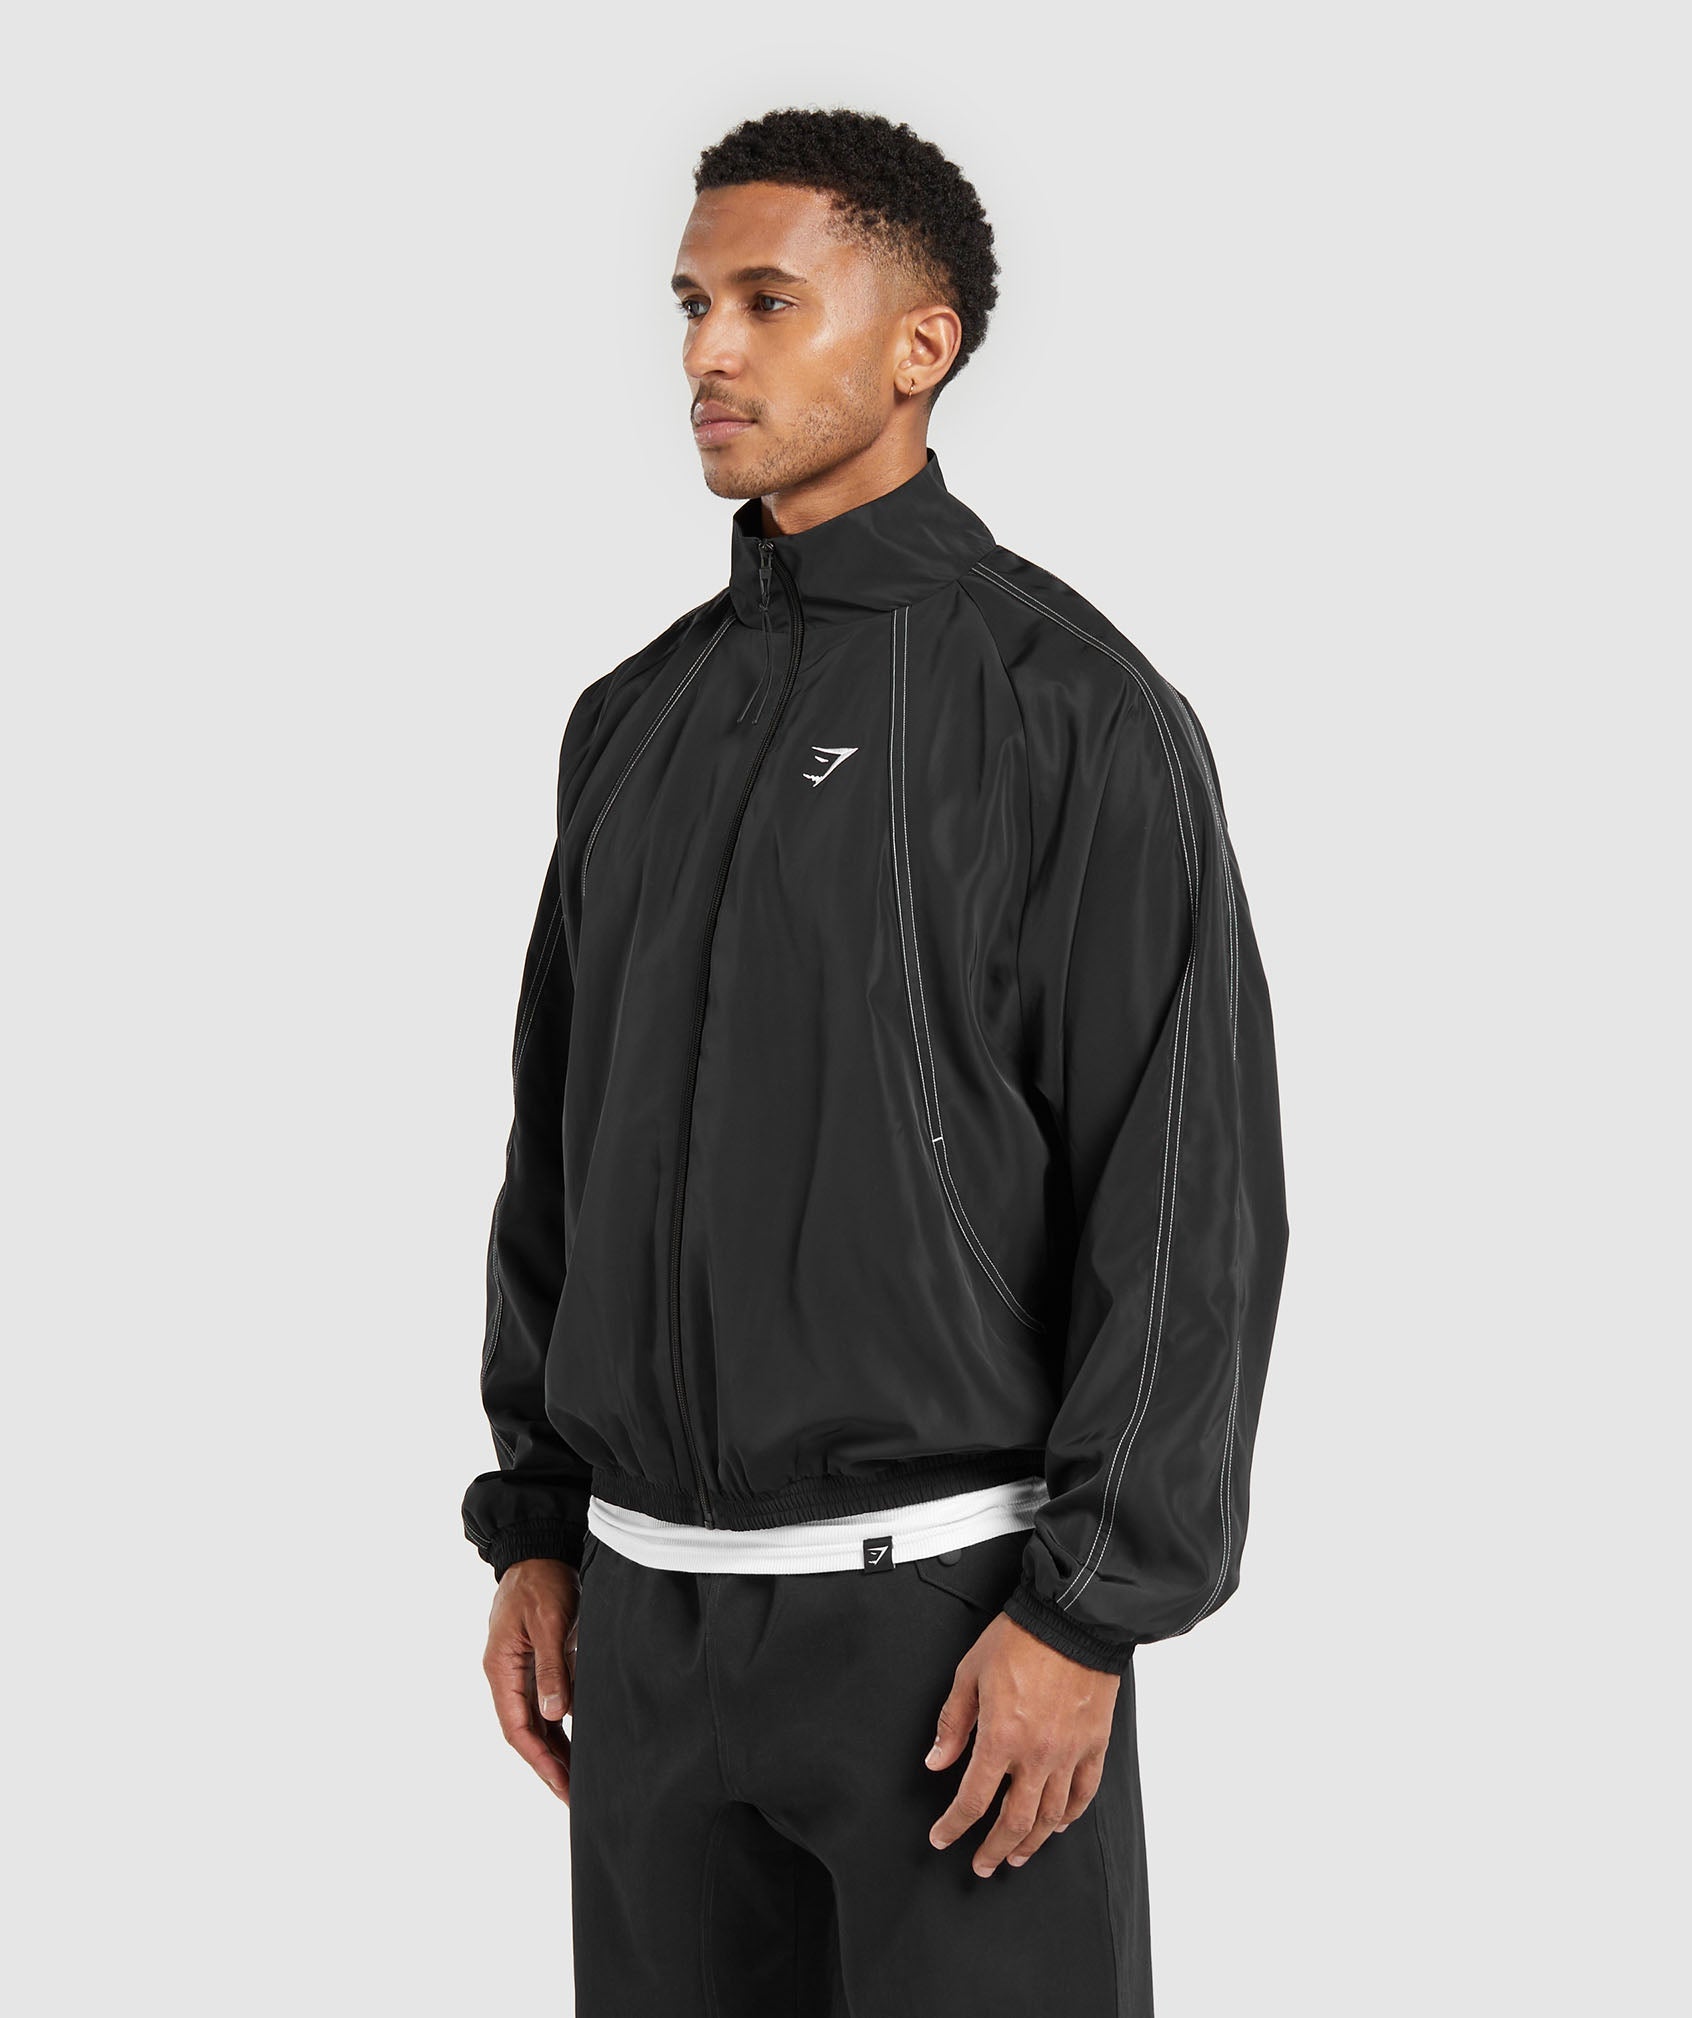 Track Top in Black - view 3